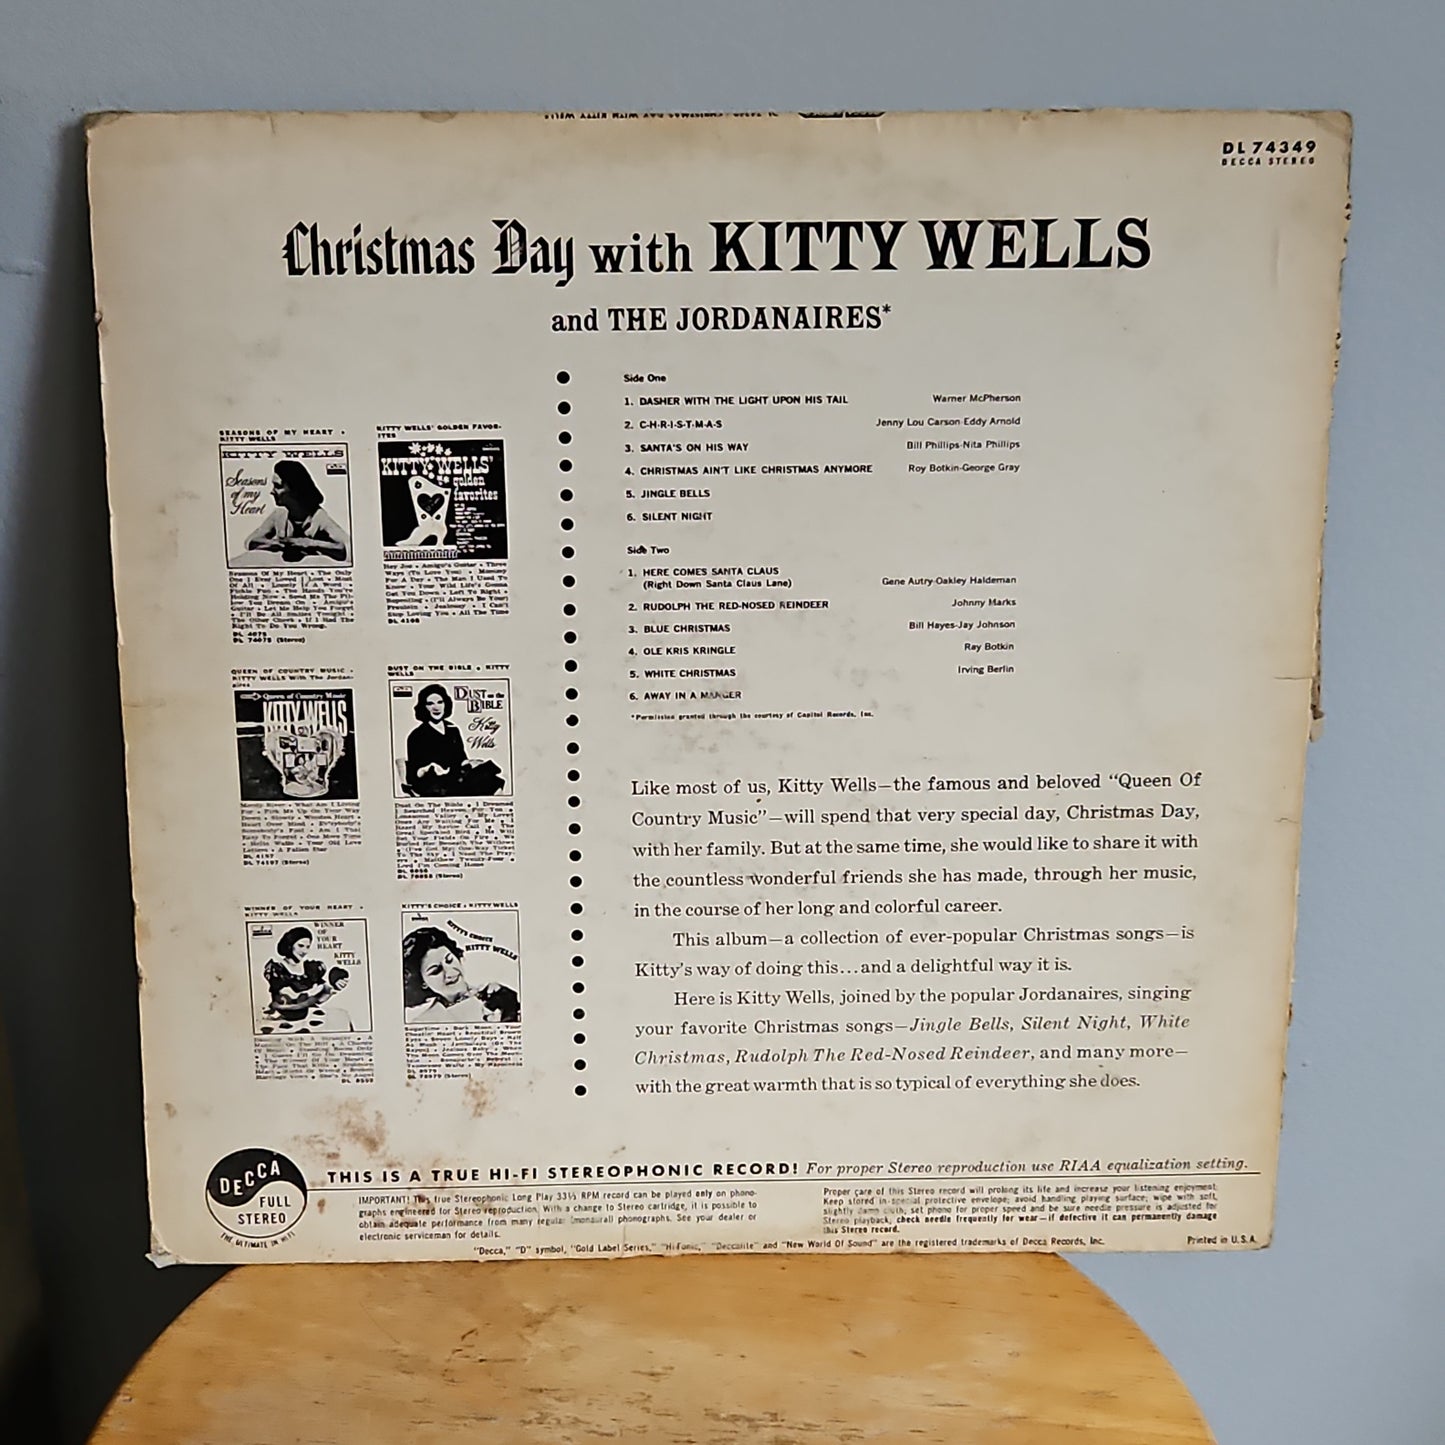 Christmas Day with Kitty Wells By Decca Records